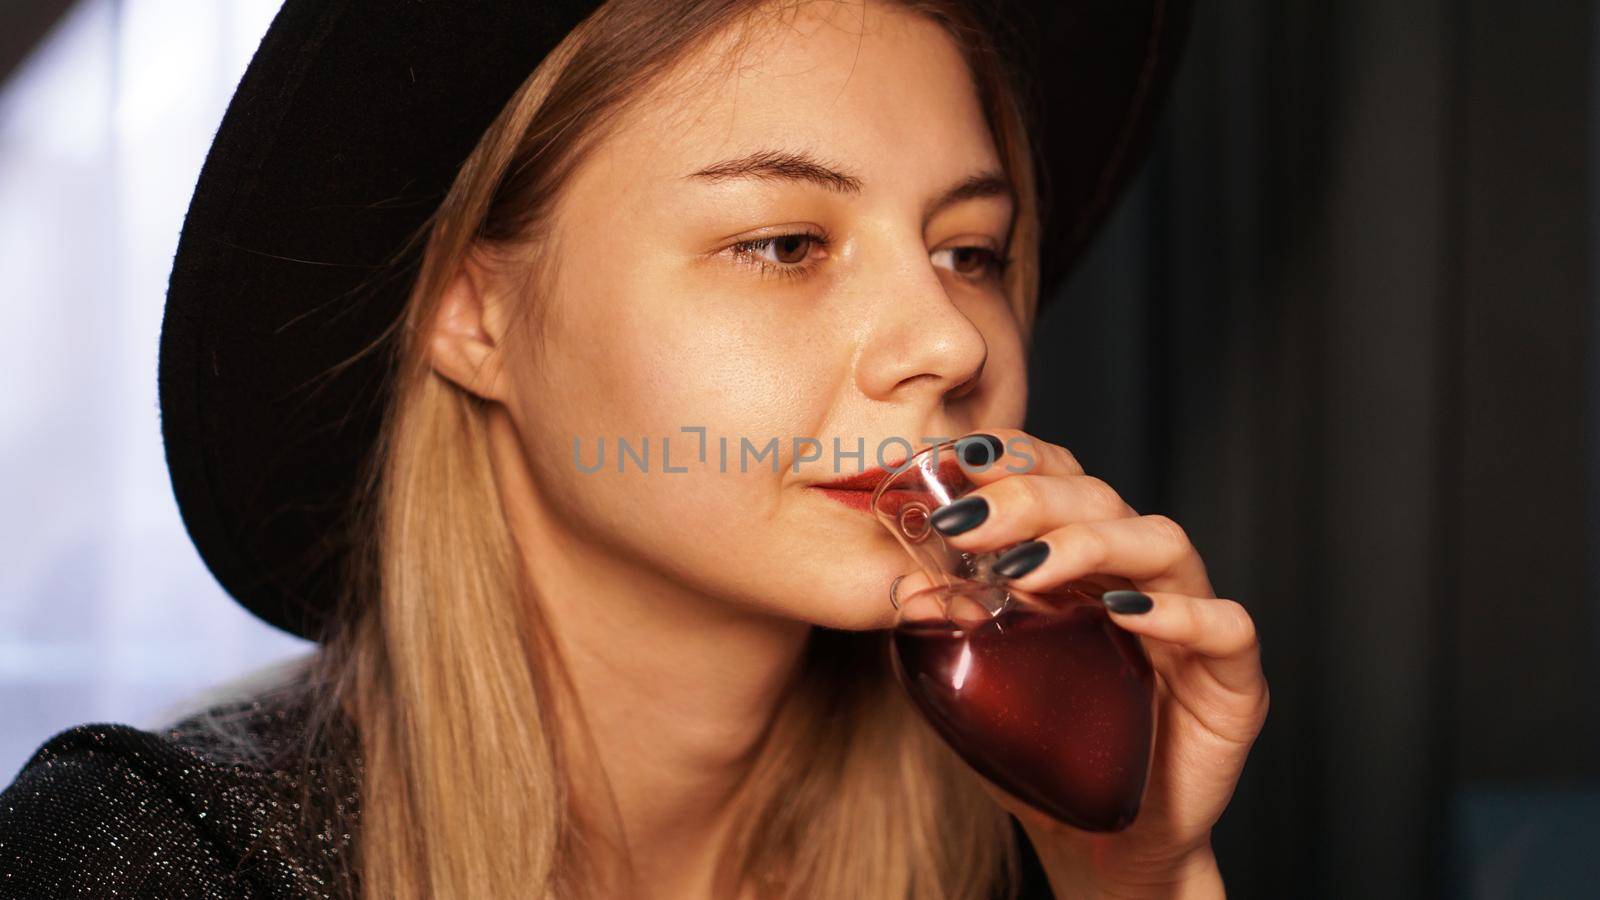 Beautiful young woman drinking love potion from a bottle in the shape of a heart